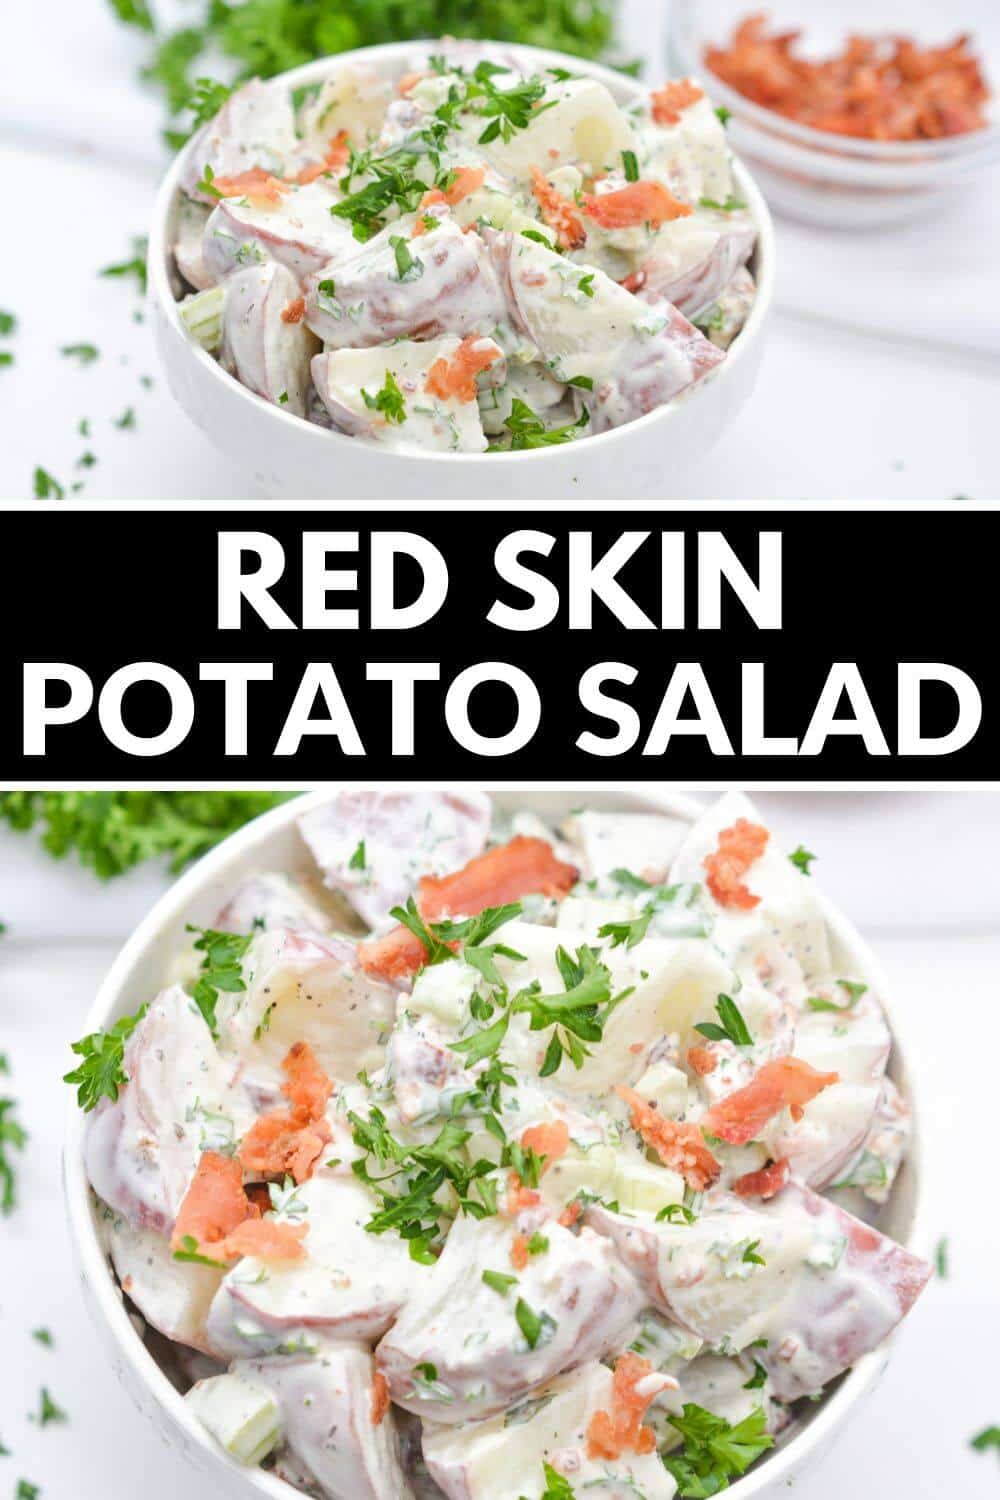 Red skin potato salad with recipe title text overlay.